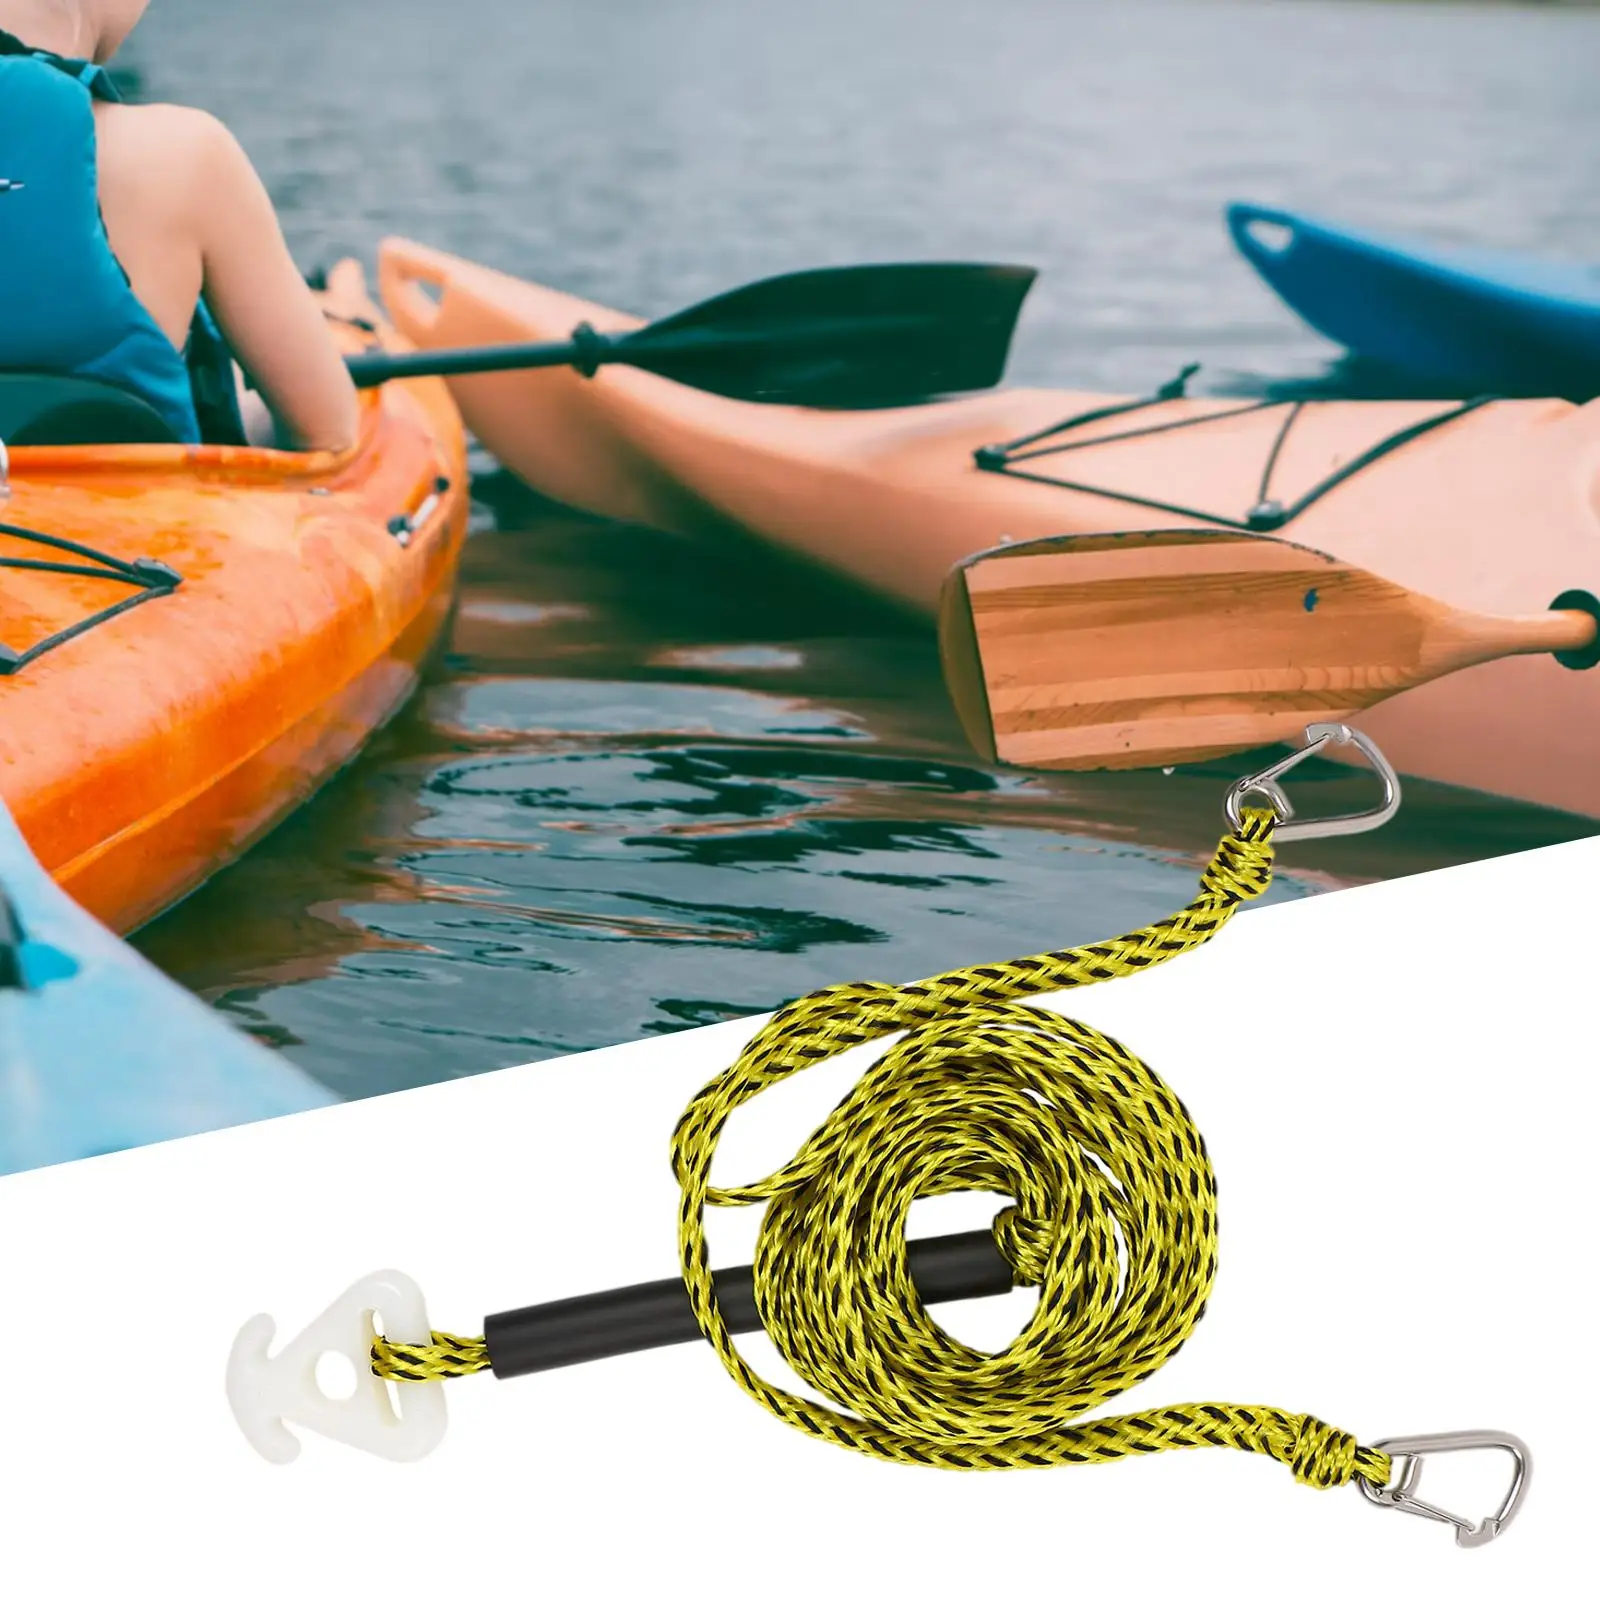 Pulley Tow Harness Watersports Rope 17ft Waakeboarding Tubing Wake Boarding Water Ski Waterskiing Tow Harness Quick Connector